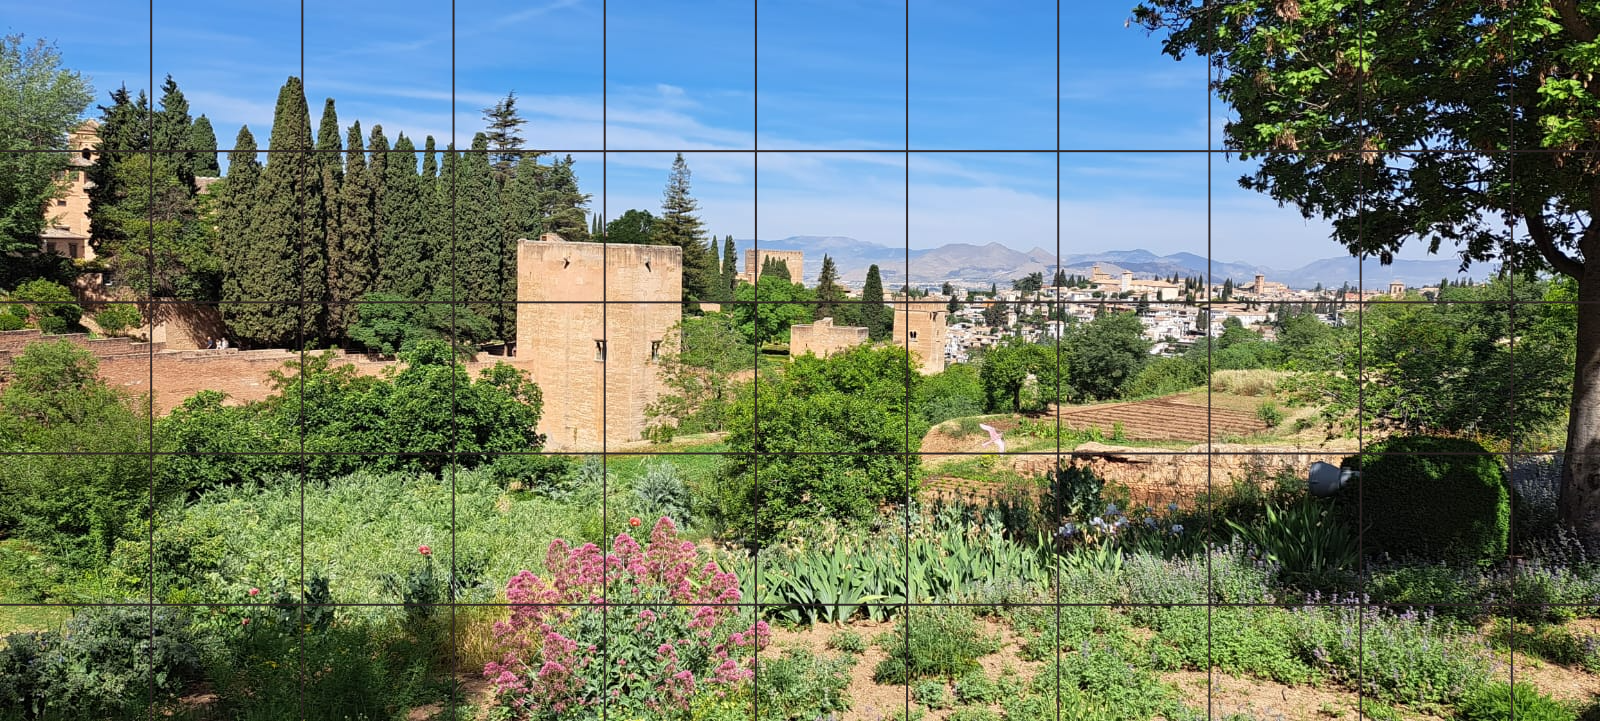 create grid on landscape for drawing